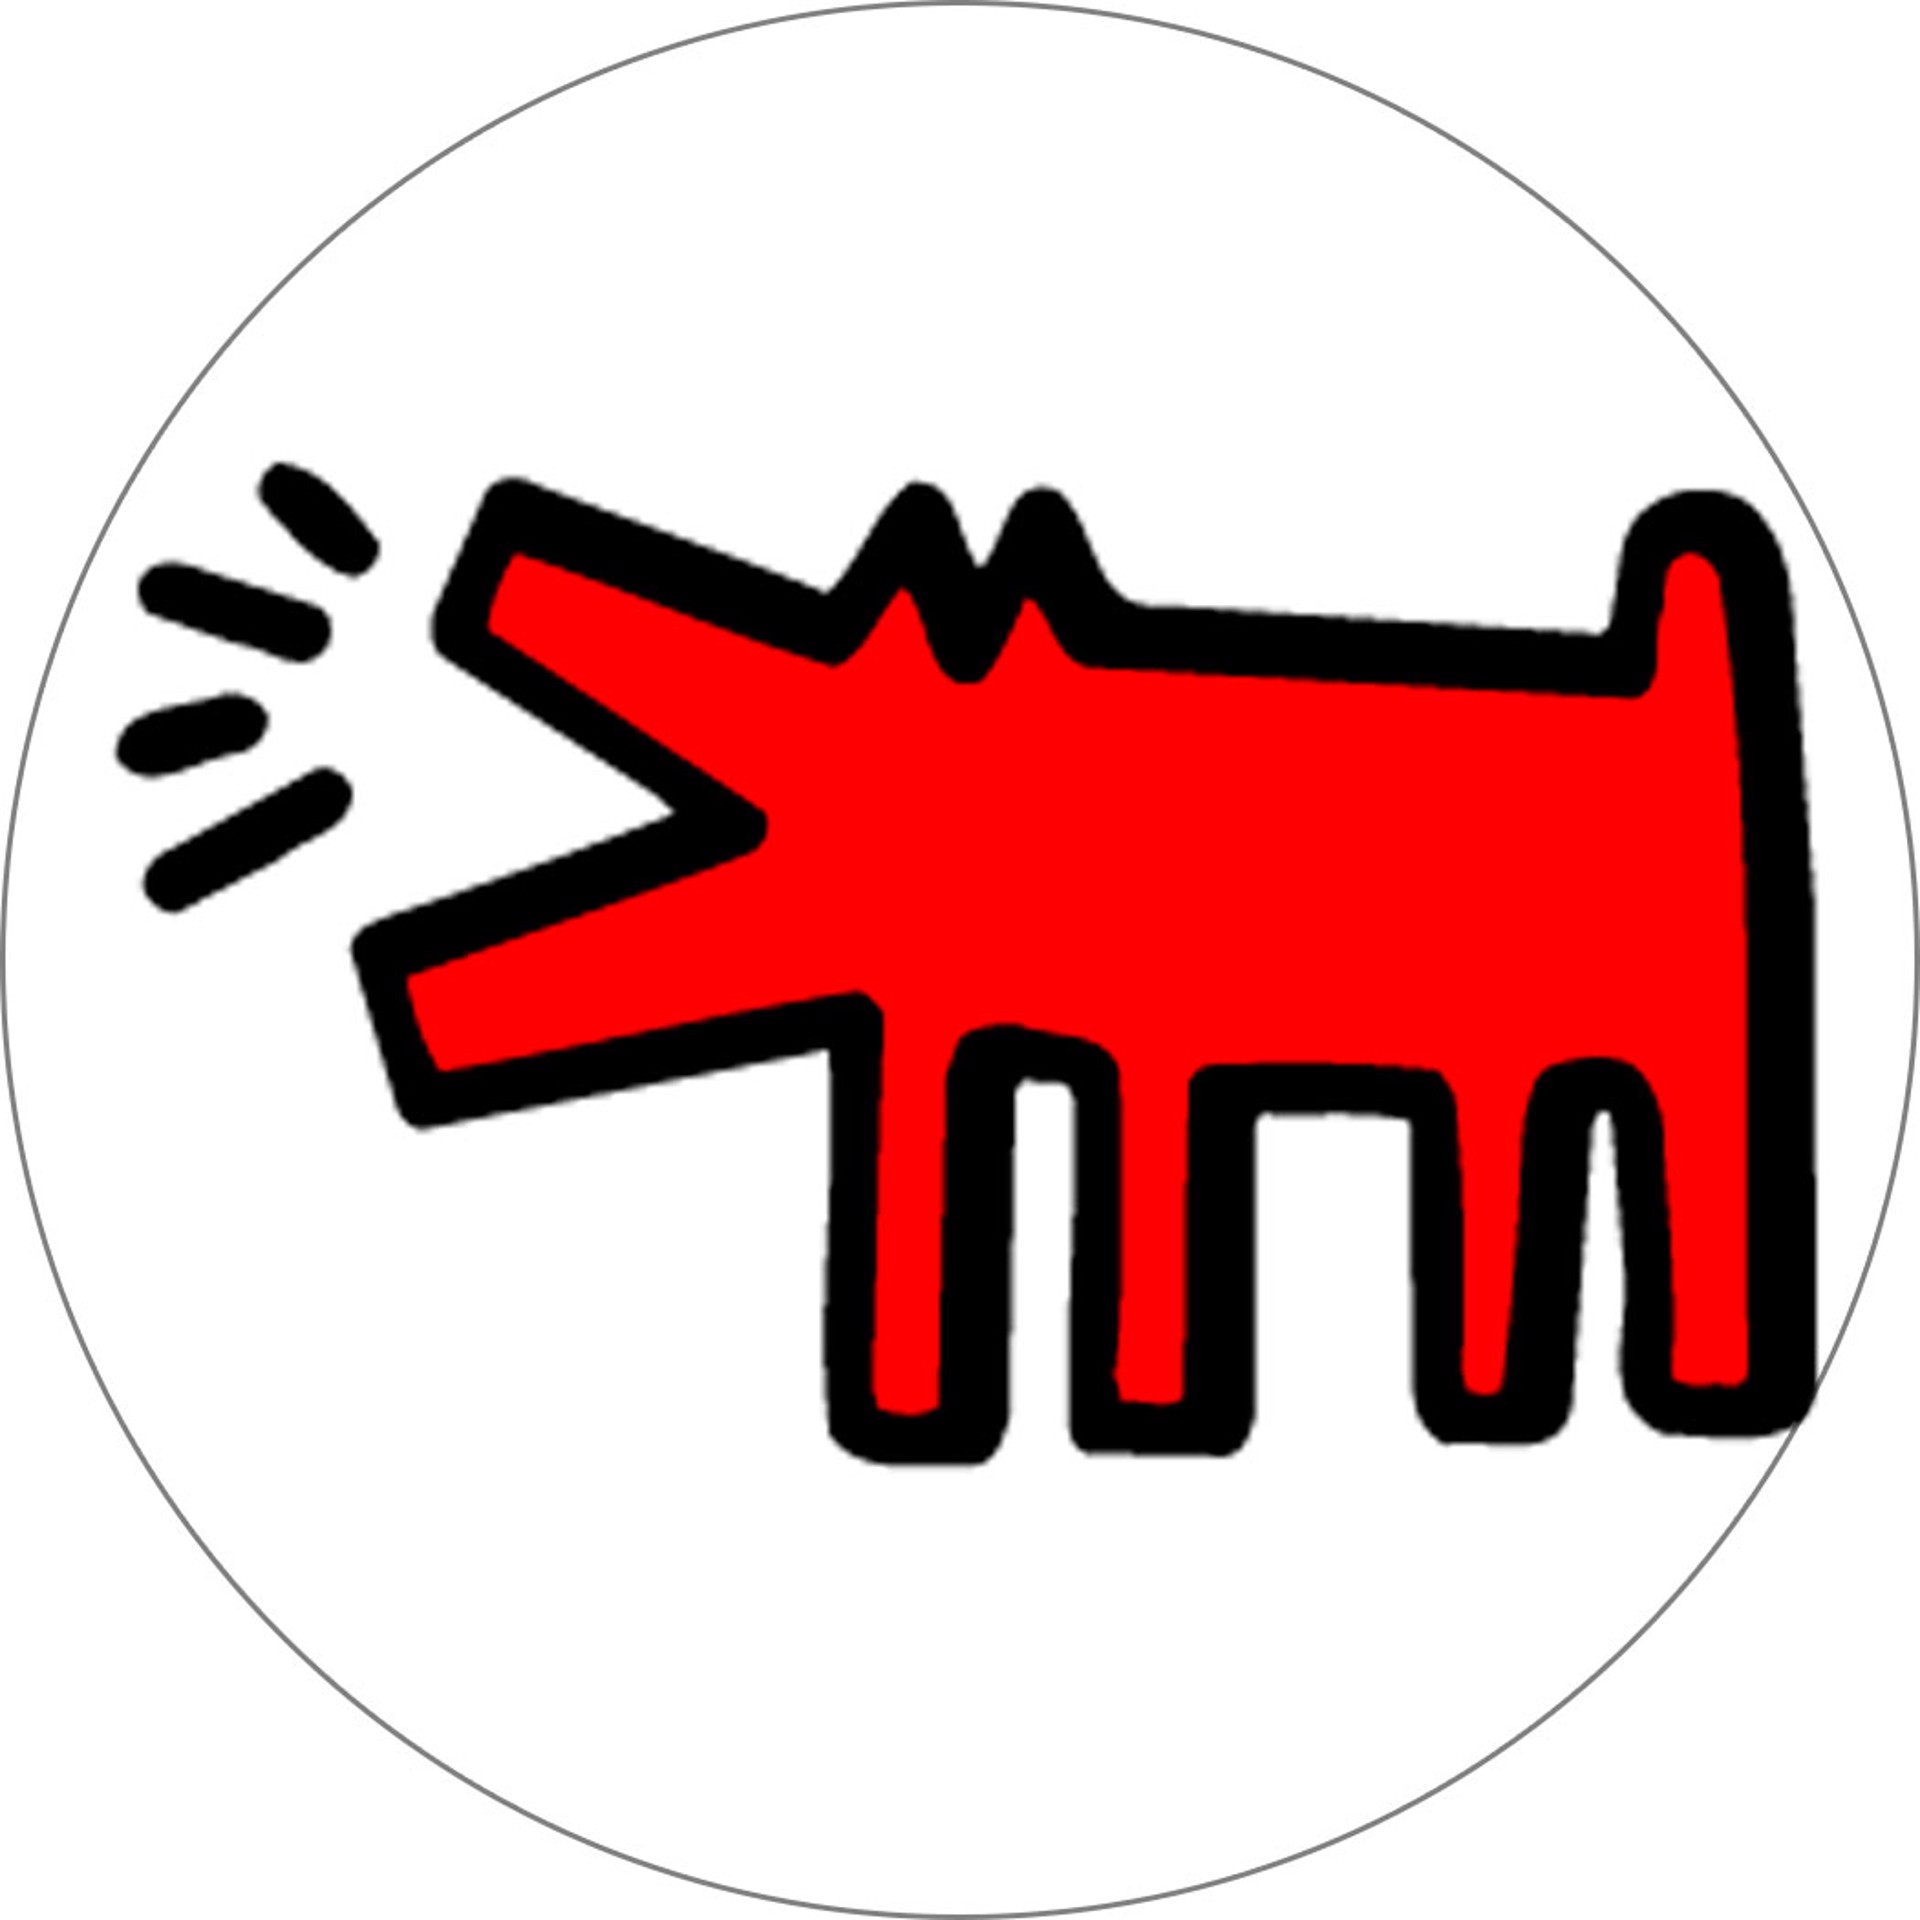 Keith Haring Red Dog on White 1 Inch Pin by Keith Haring